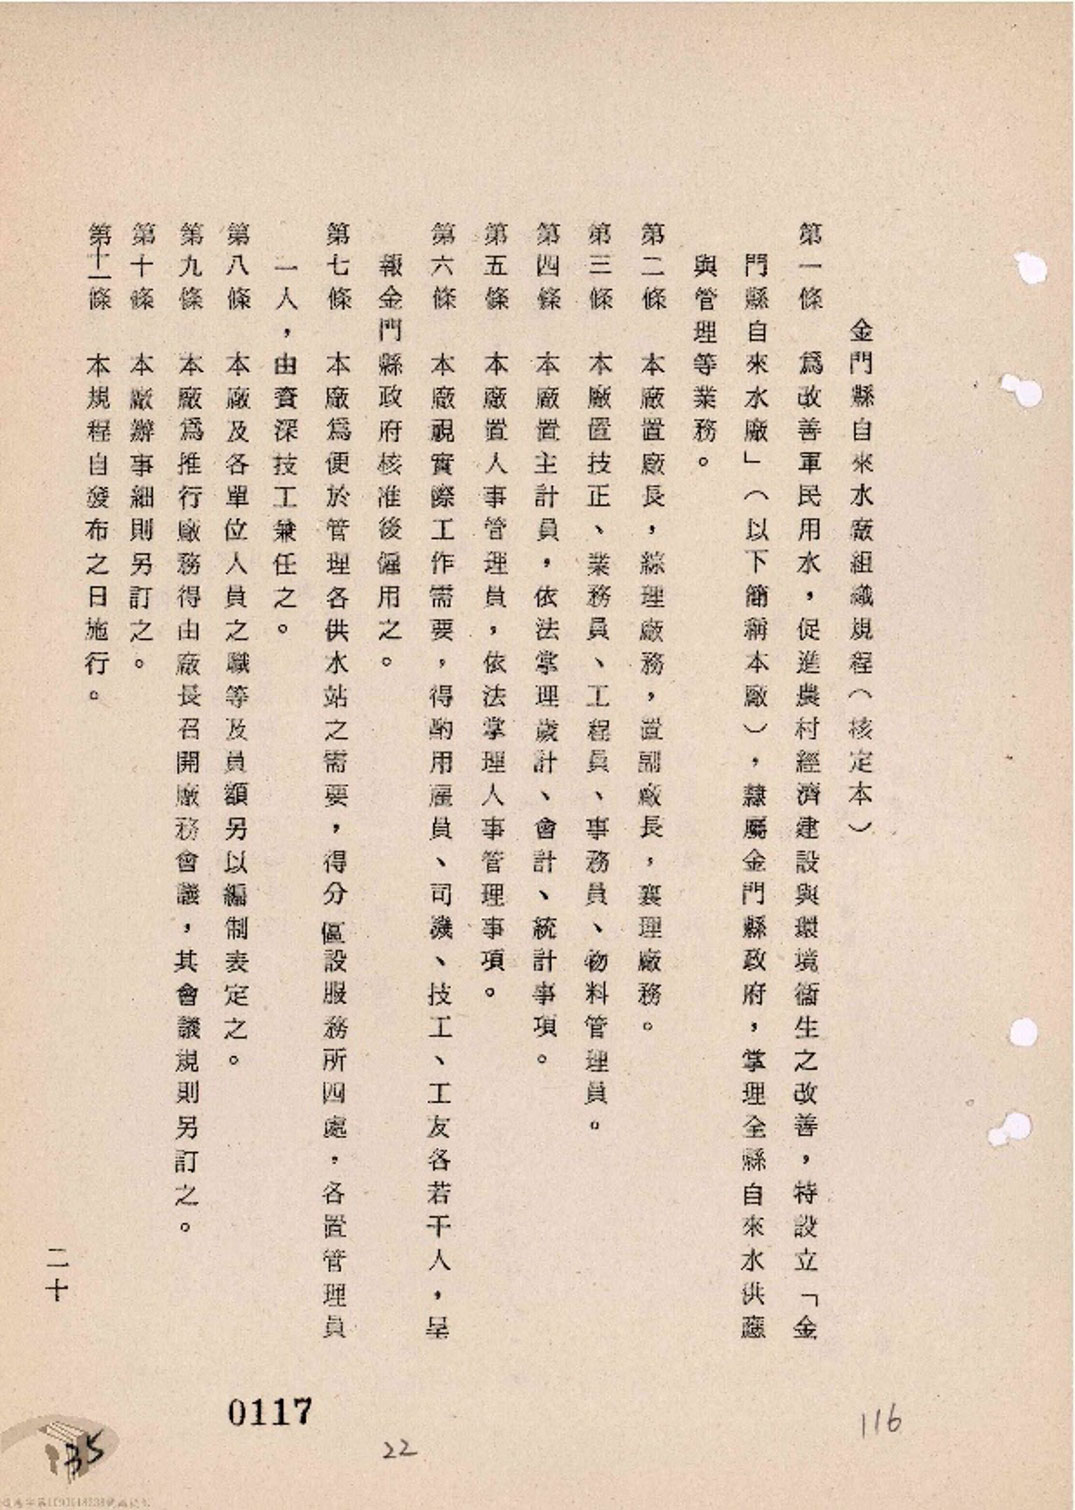 May 1974, Organizational Regulations of the Kinmen County Waterworks during the period of military administration.